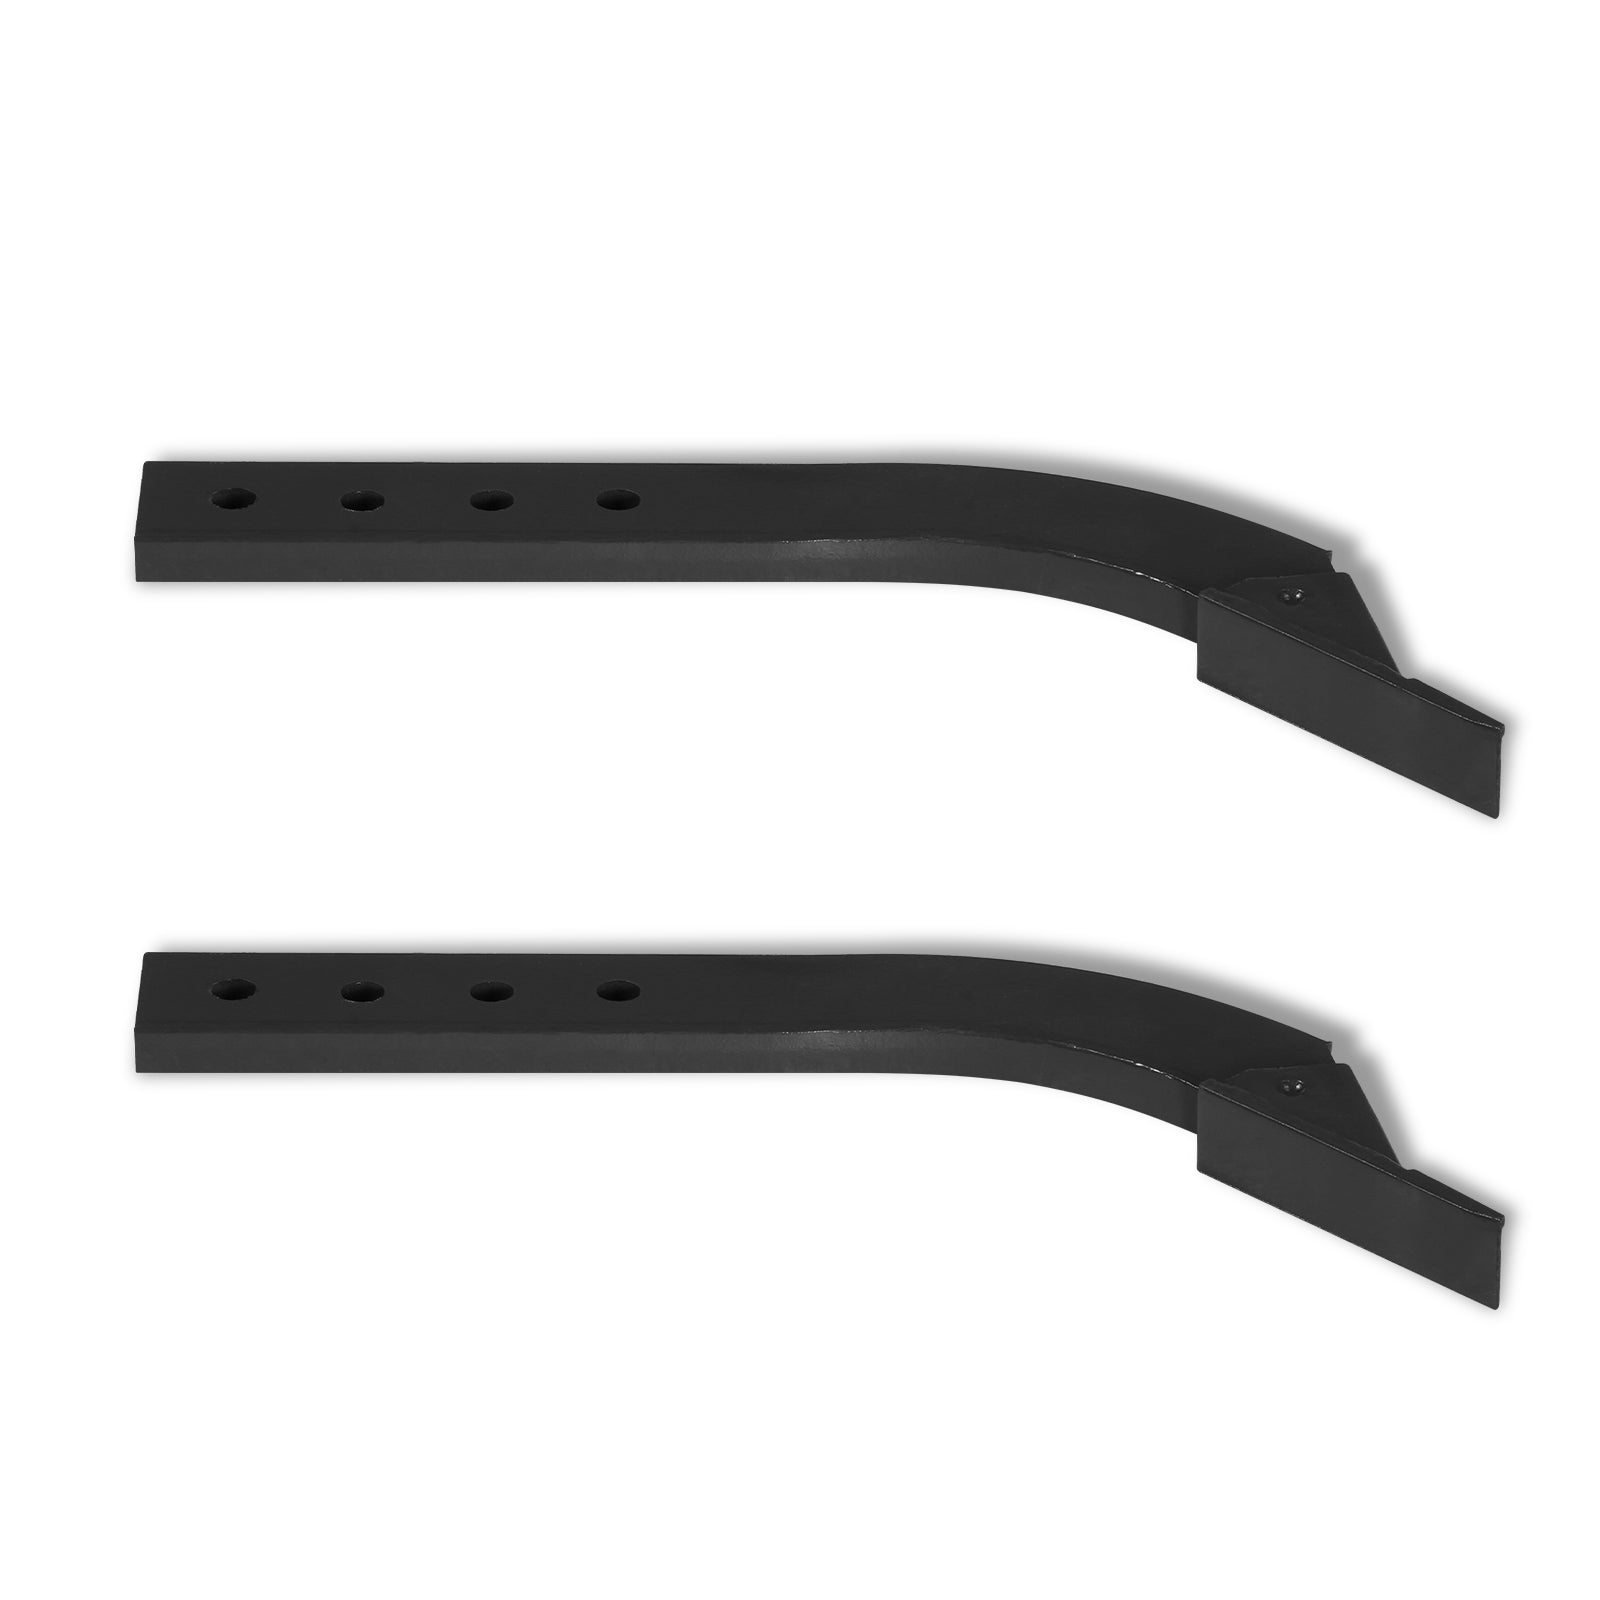 ( 1 Pack / 2 Pcs ) Replacement Shanks for Land Leveler LP72 and LP84 (SKU: 201004, 201005)